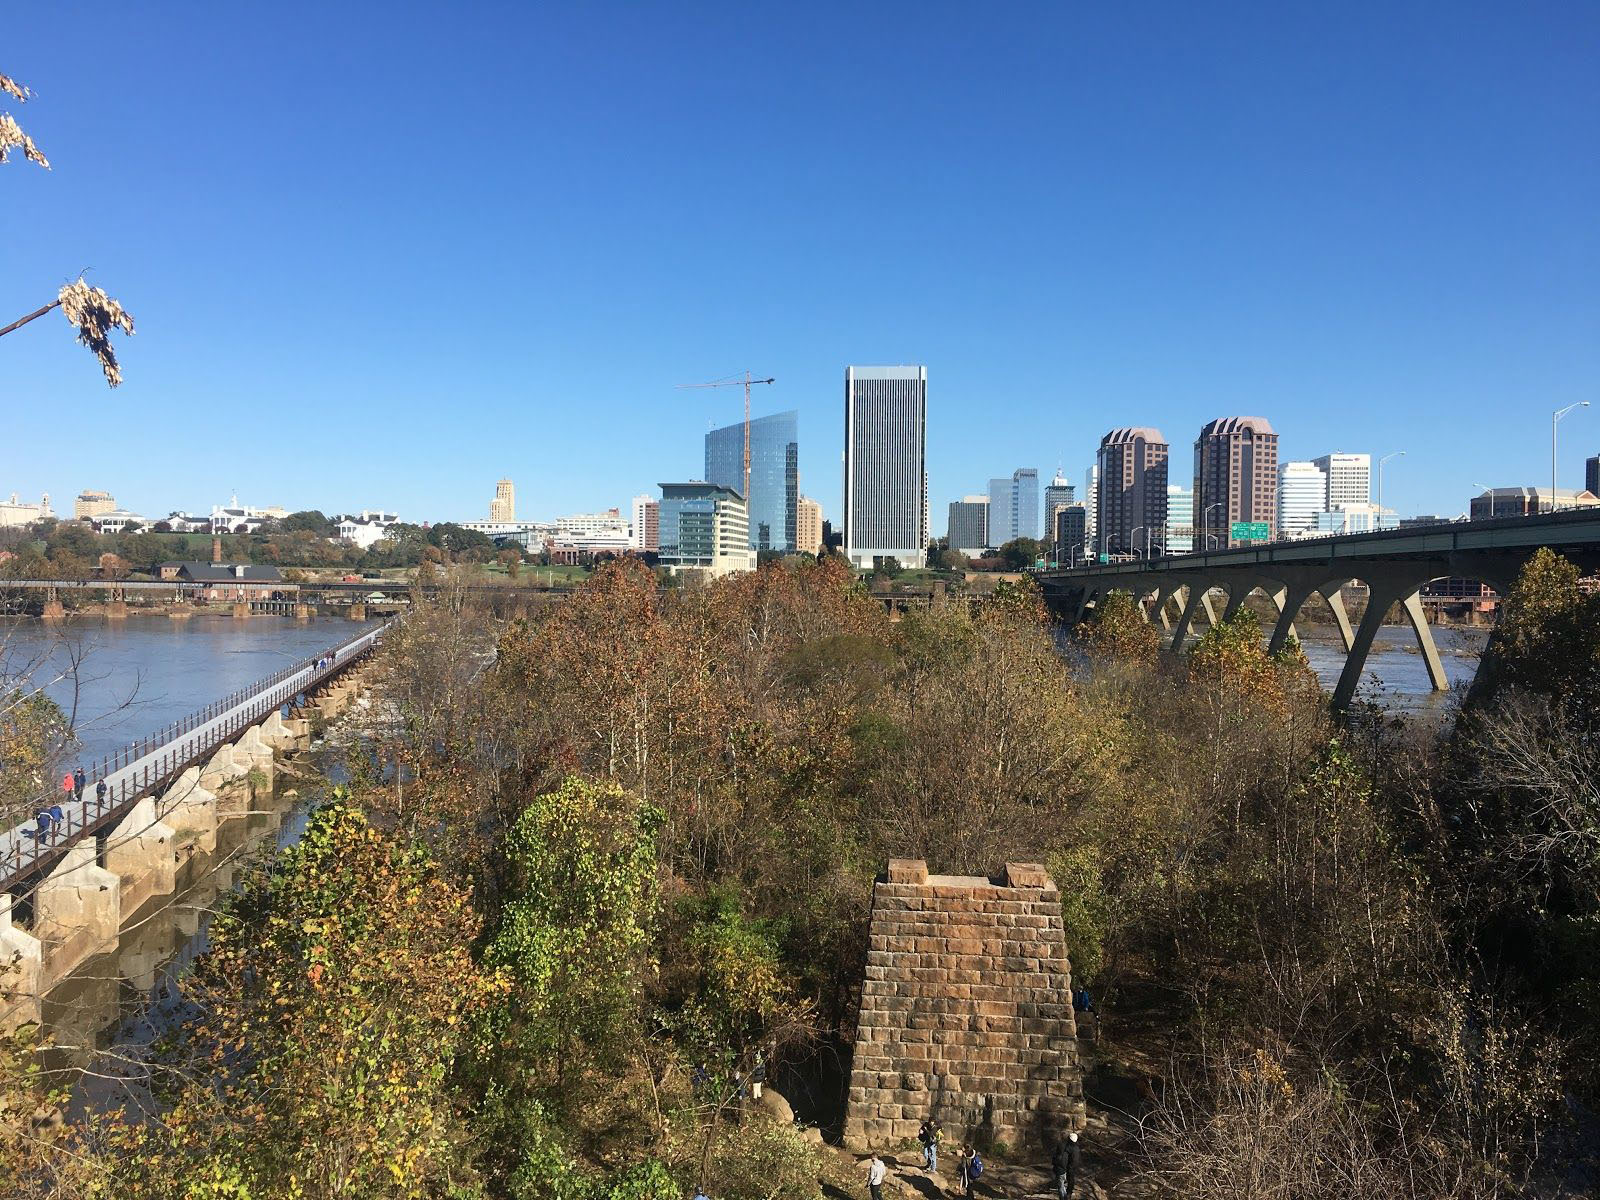 Richmond Skyline from the south side of the James River